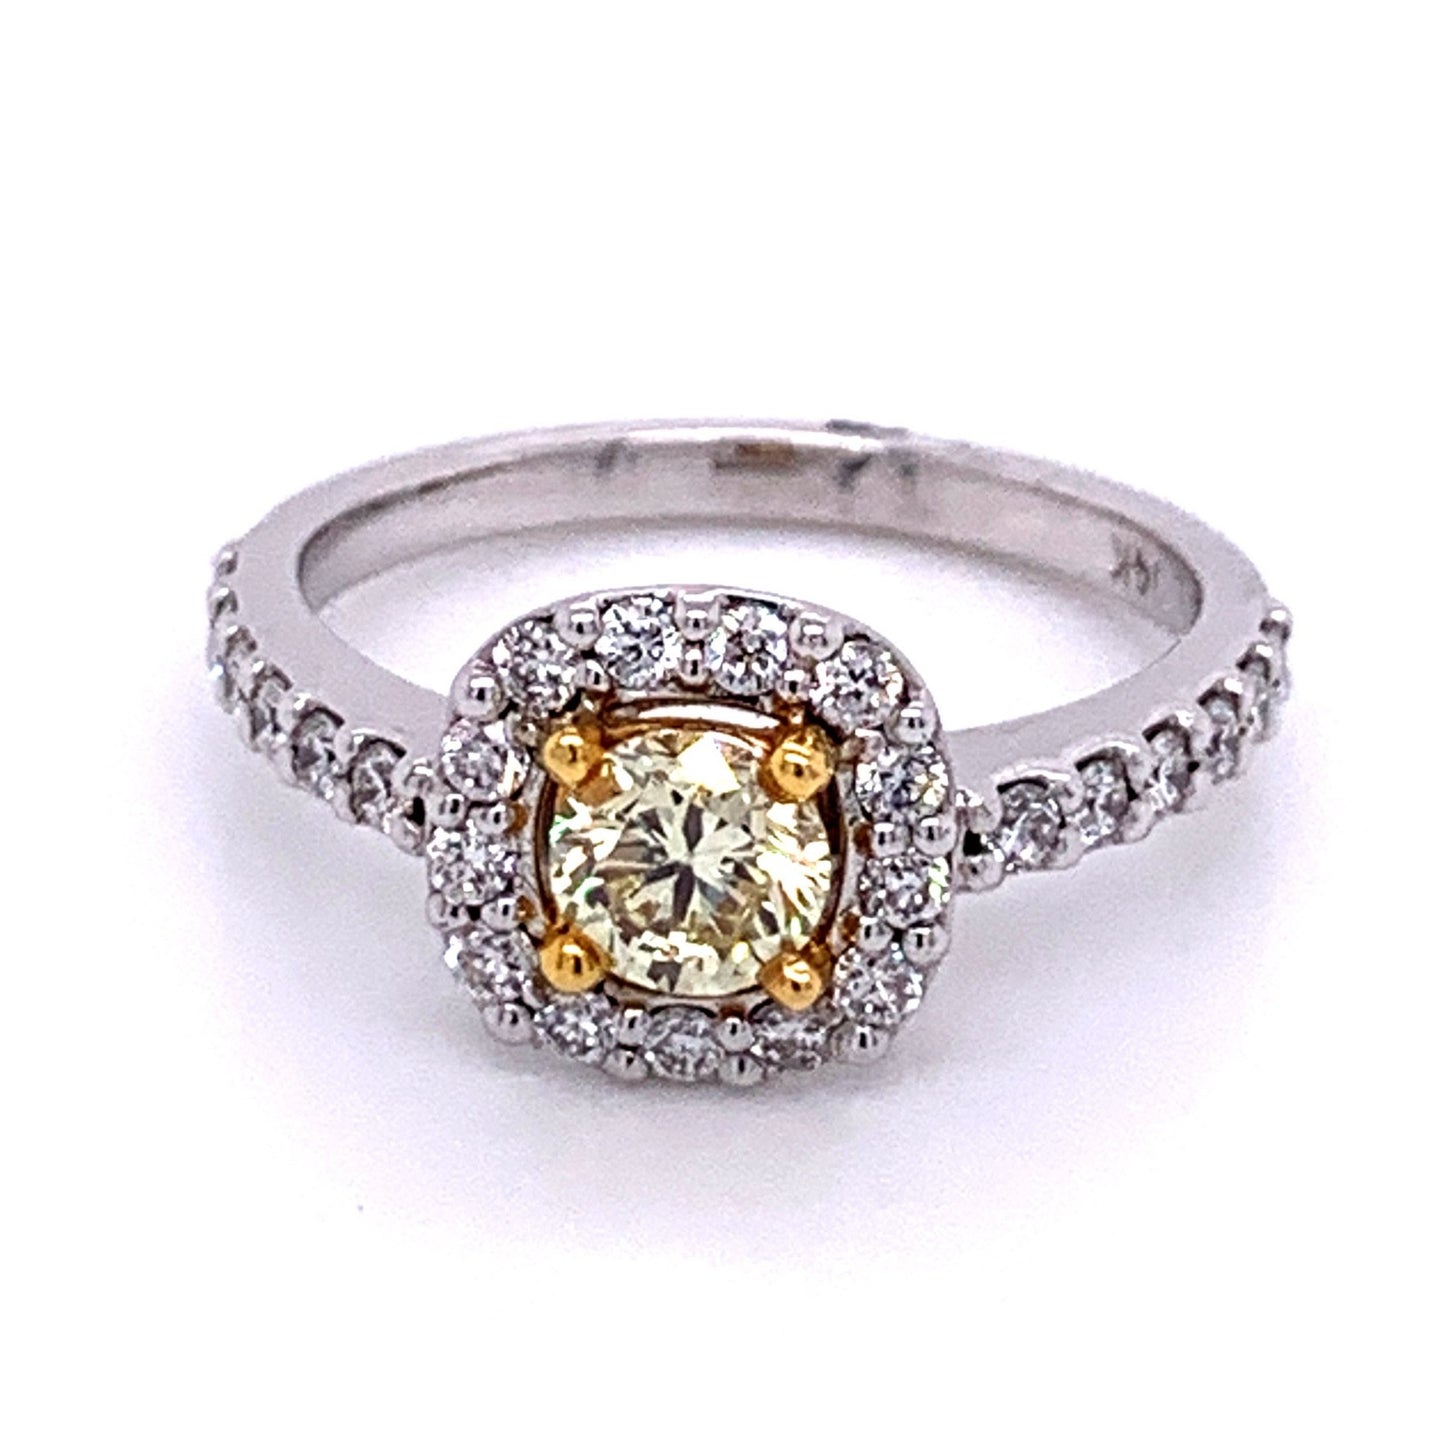 Fancy Halo Diamond Engagement Ring in 14K Two-Tone Gold